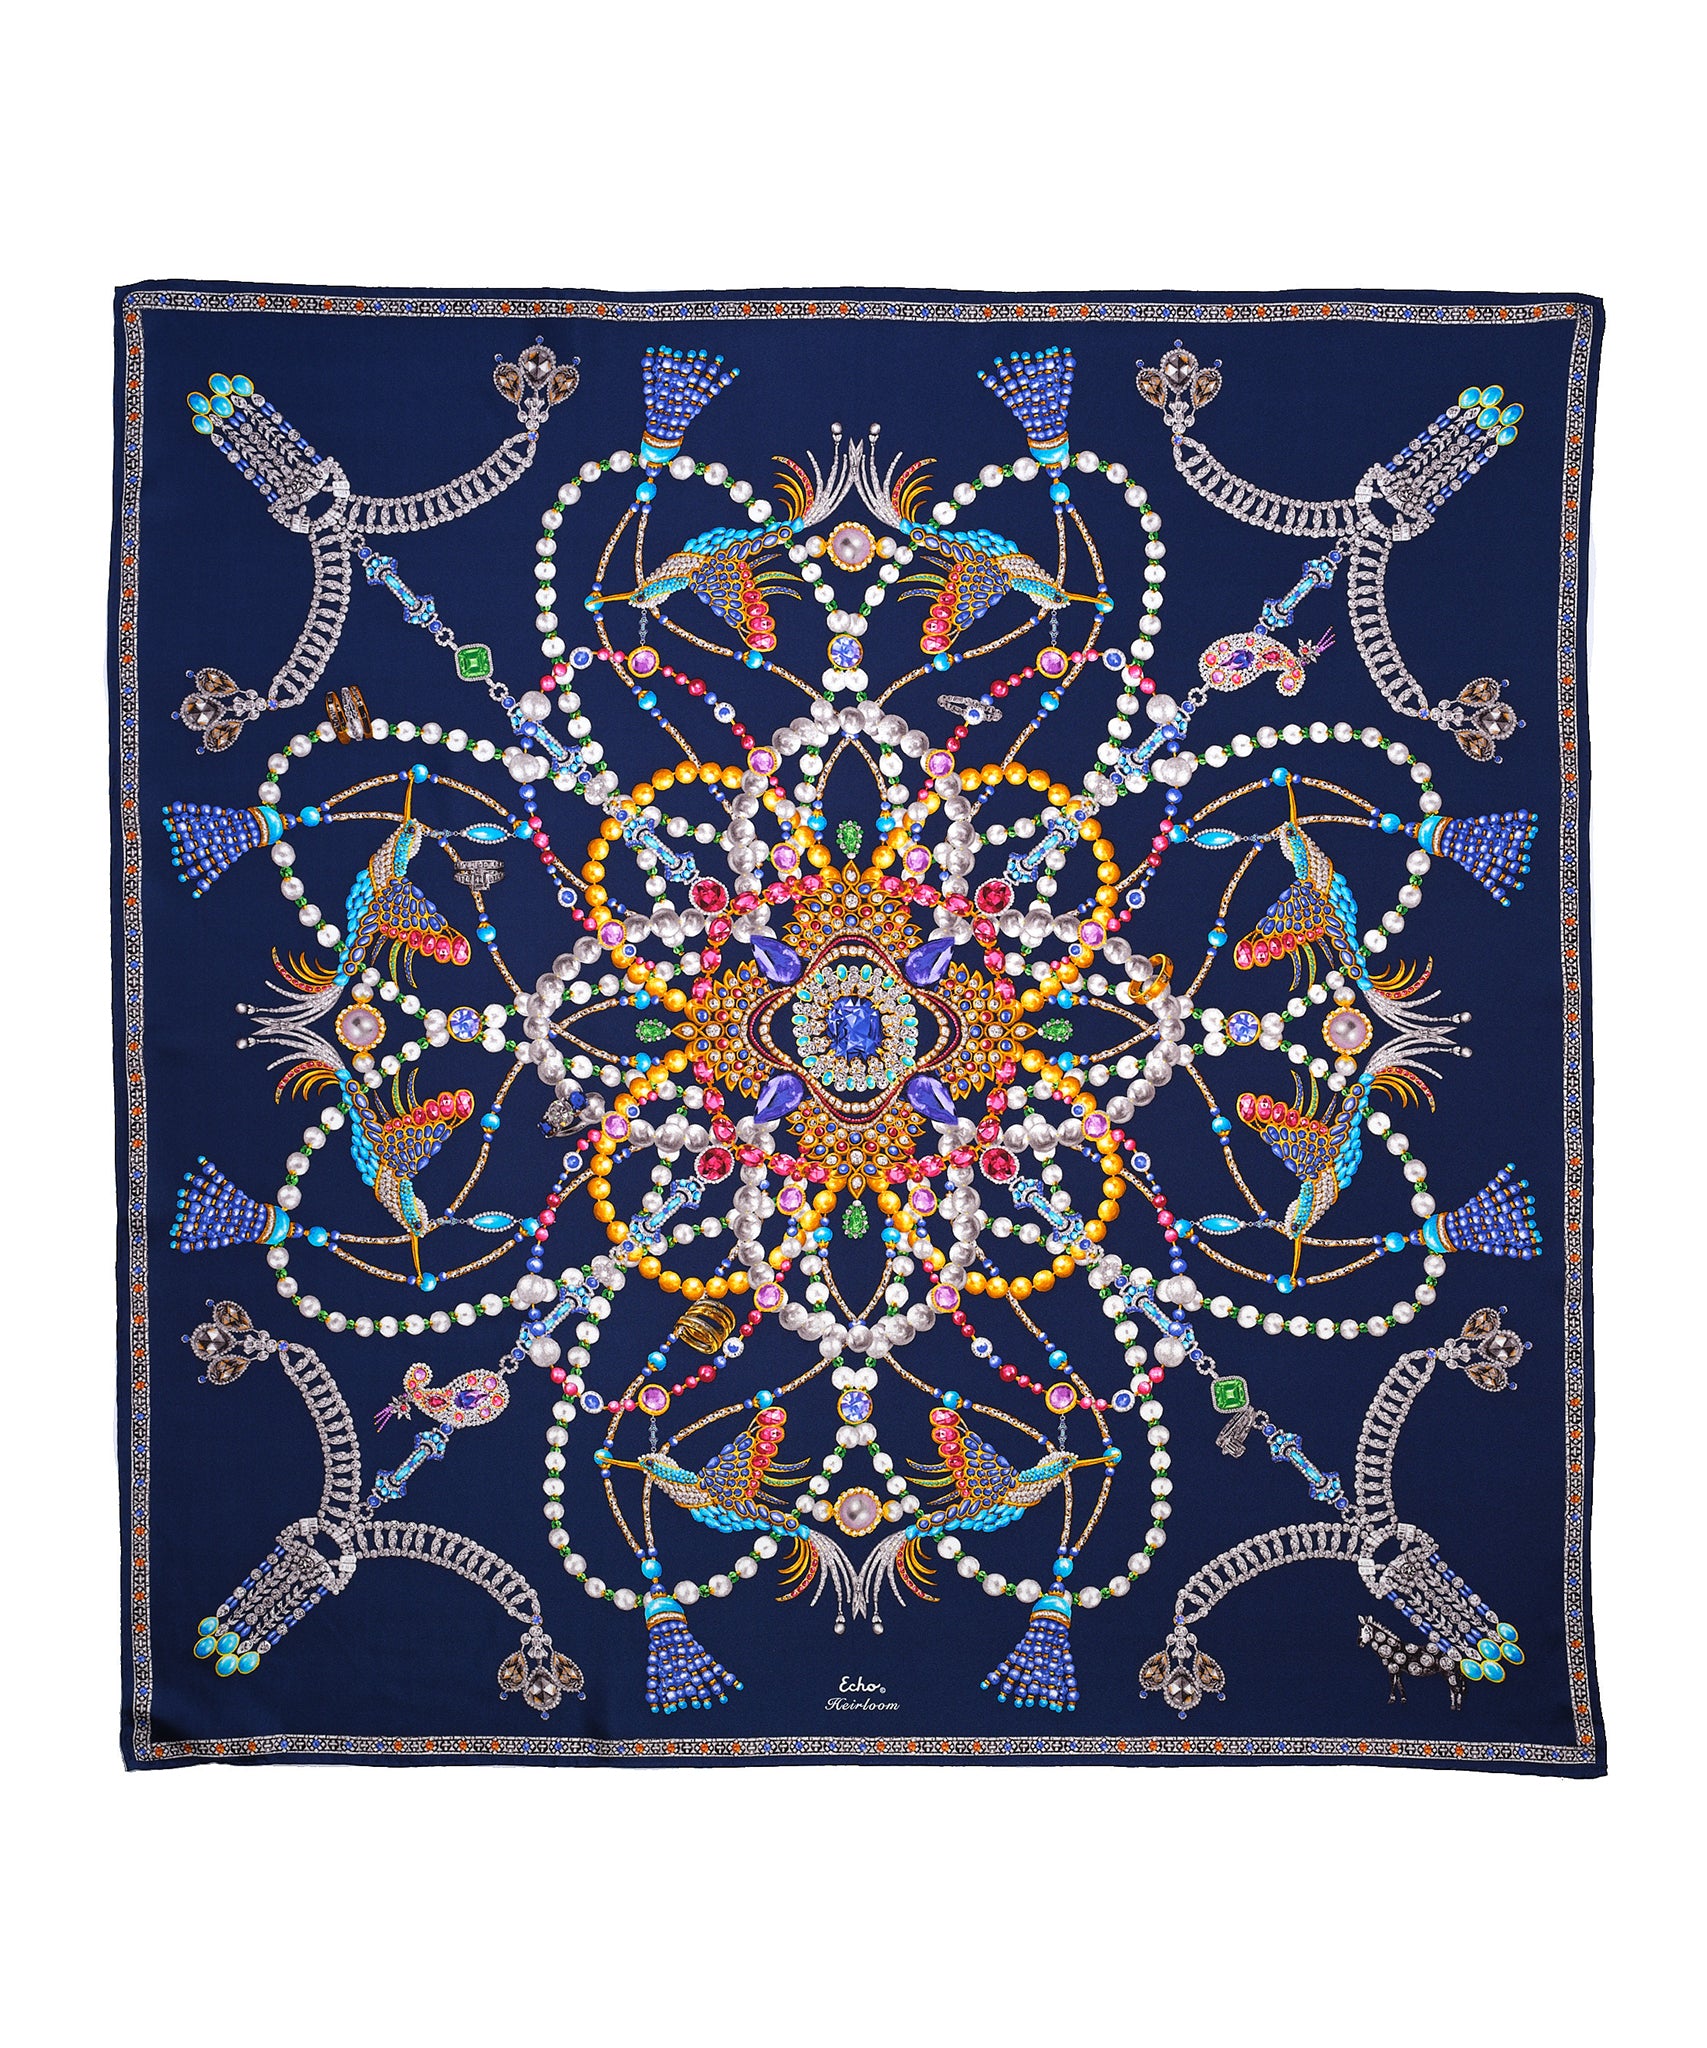 Heirloom Silk Square in color Maritime Navy